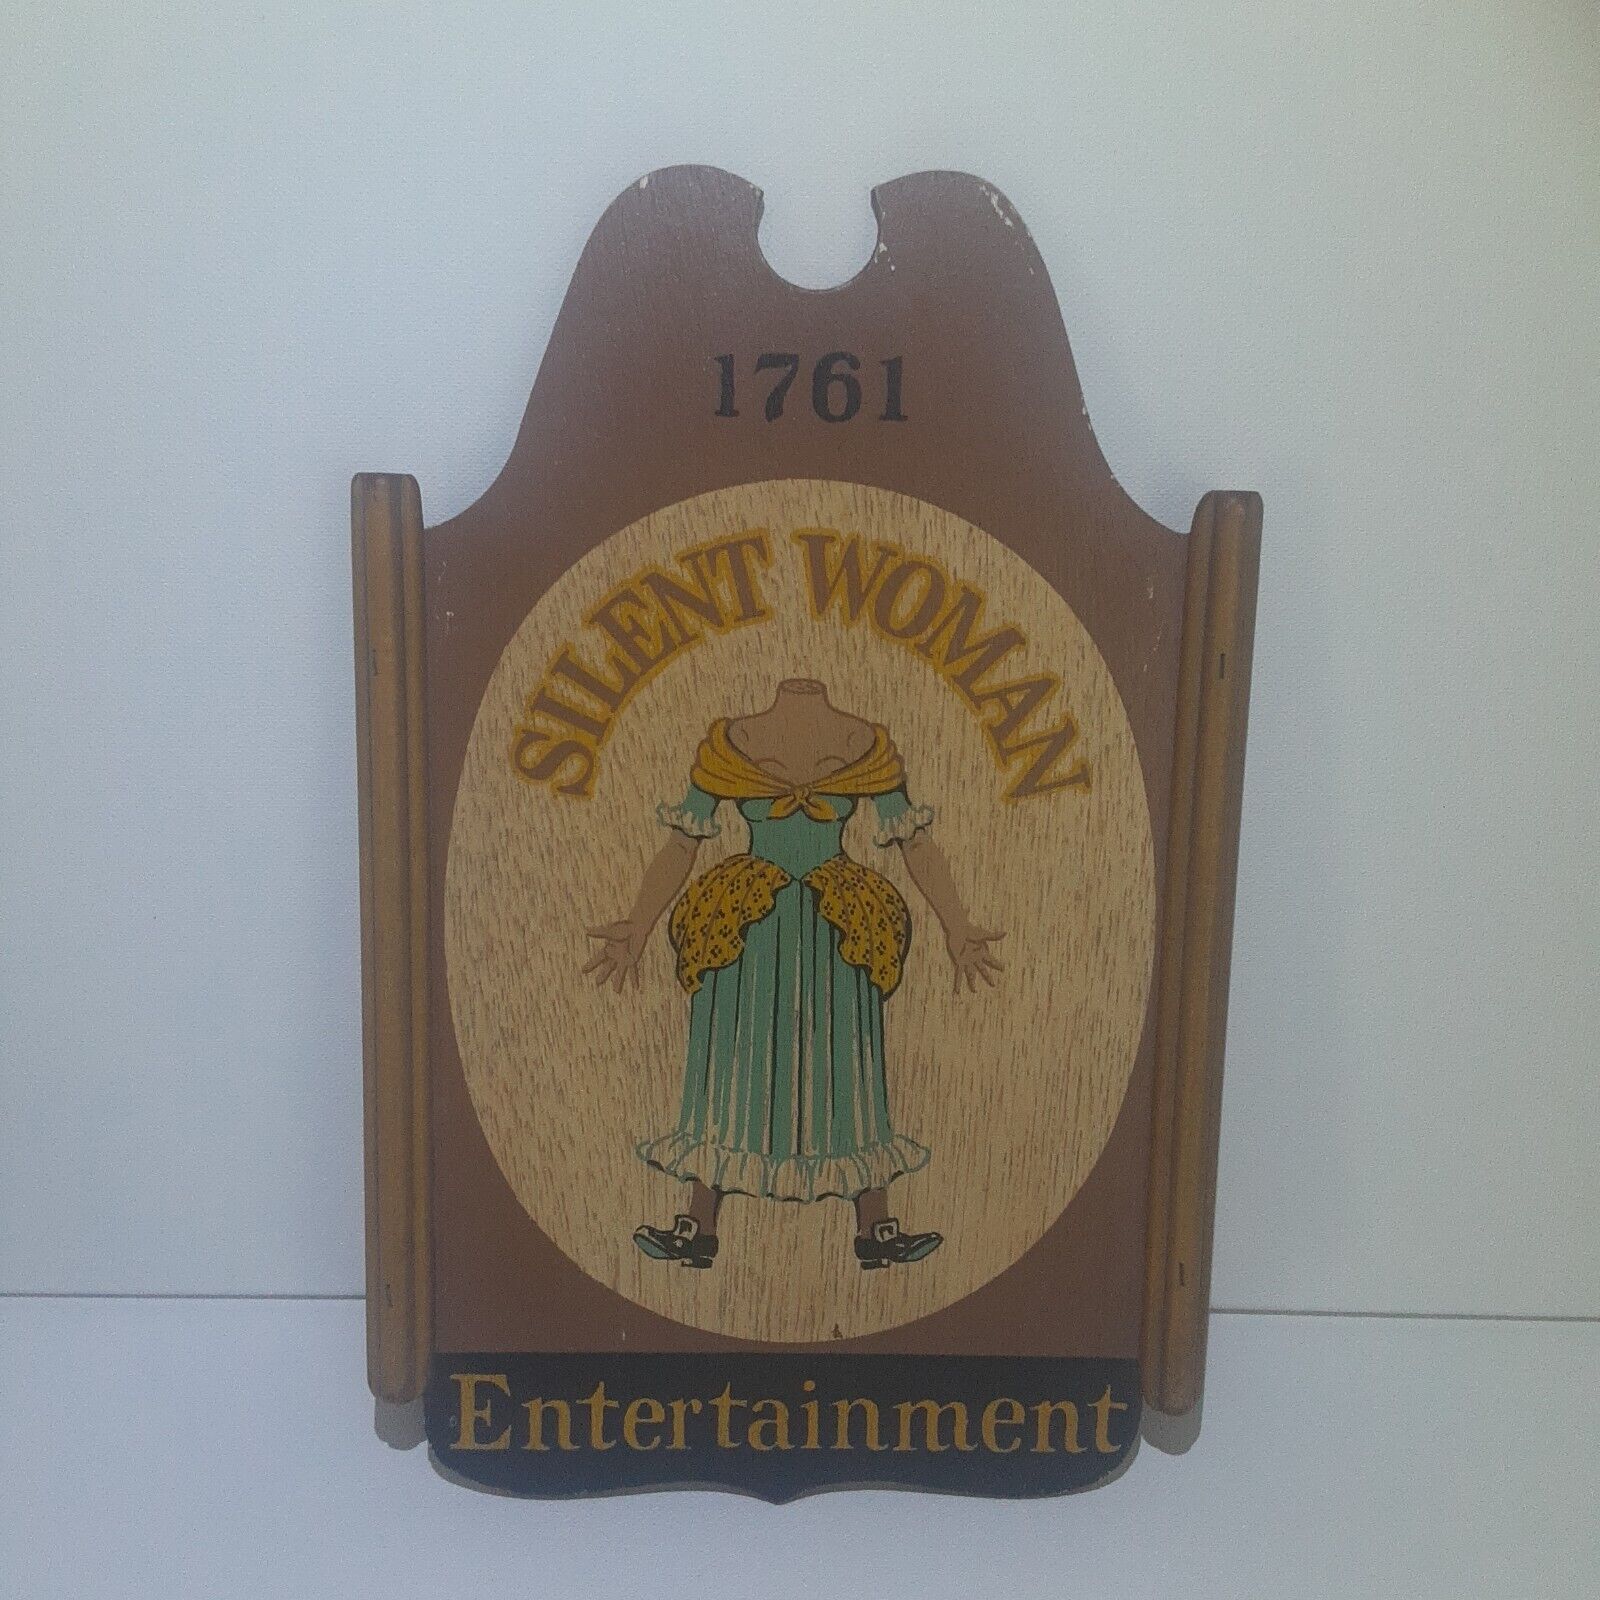 Silent Women Entertainment Decorative Tavern Signs of Early America 1761